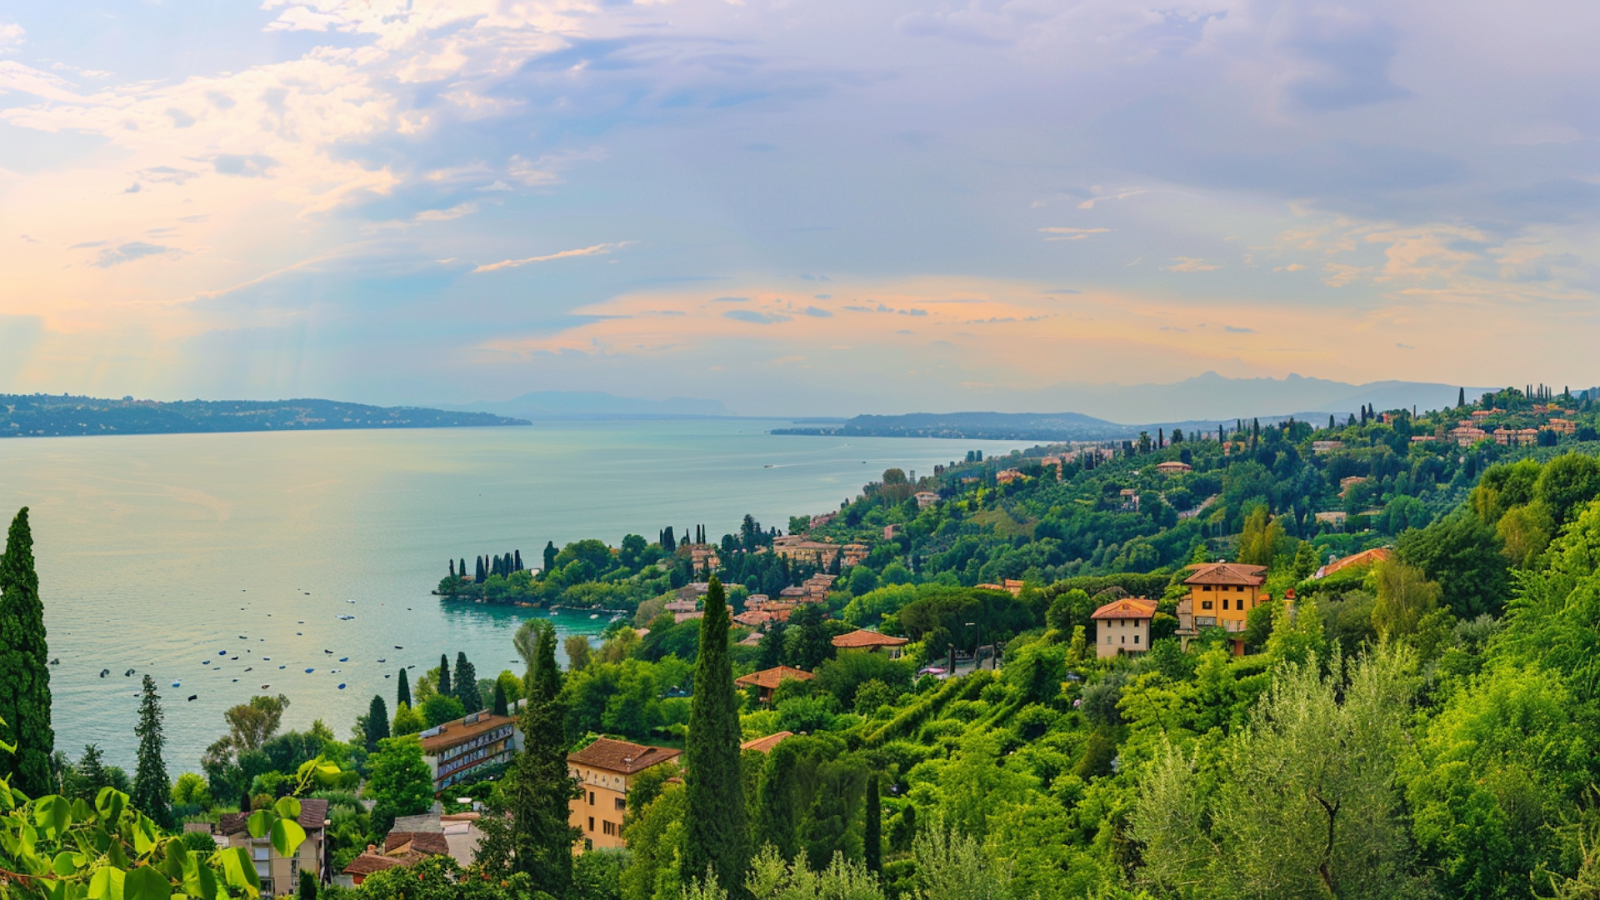 A panoramic shot of Manerba Del Garda, Italy showing houses by the lake